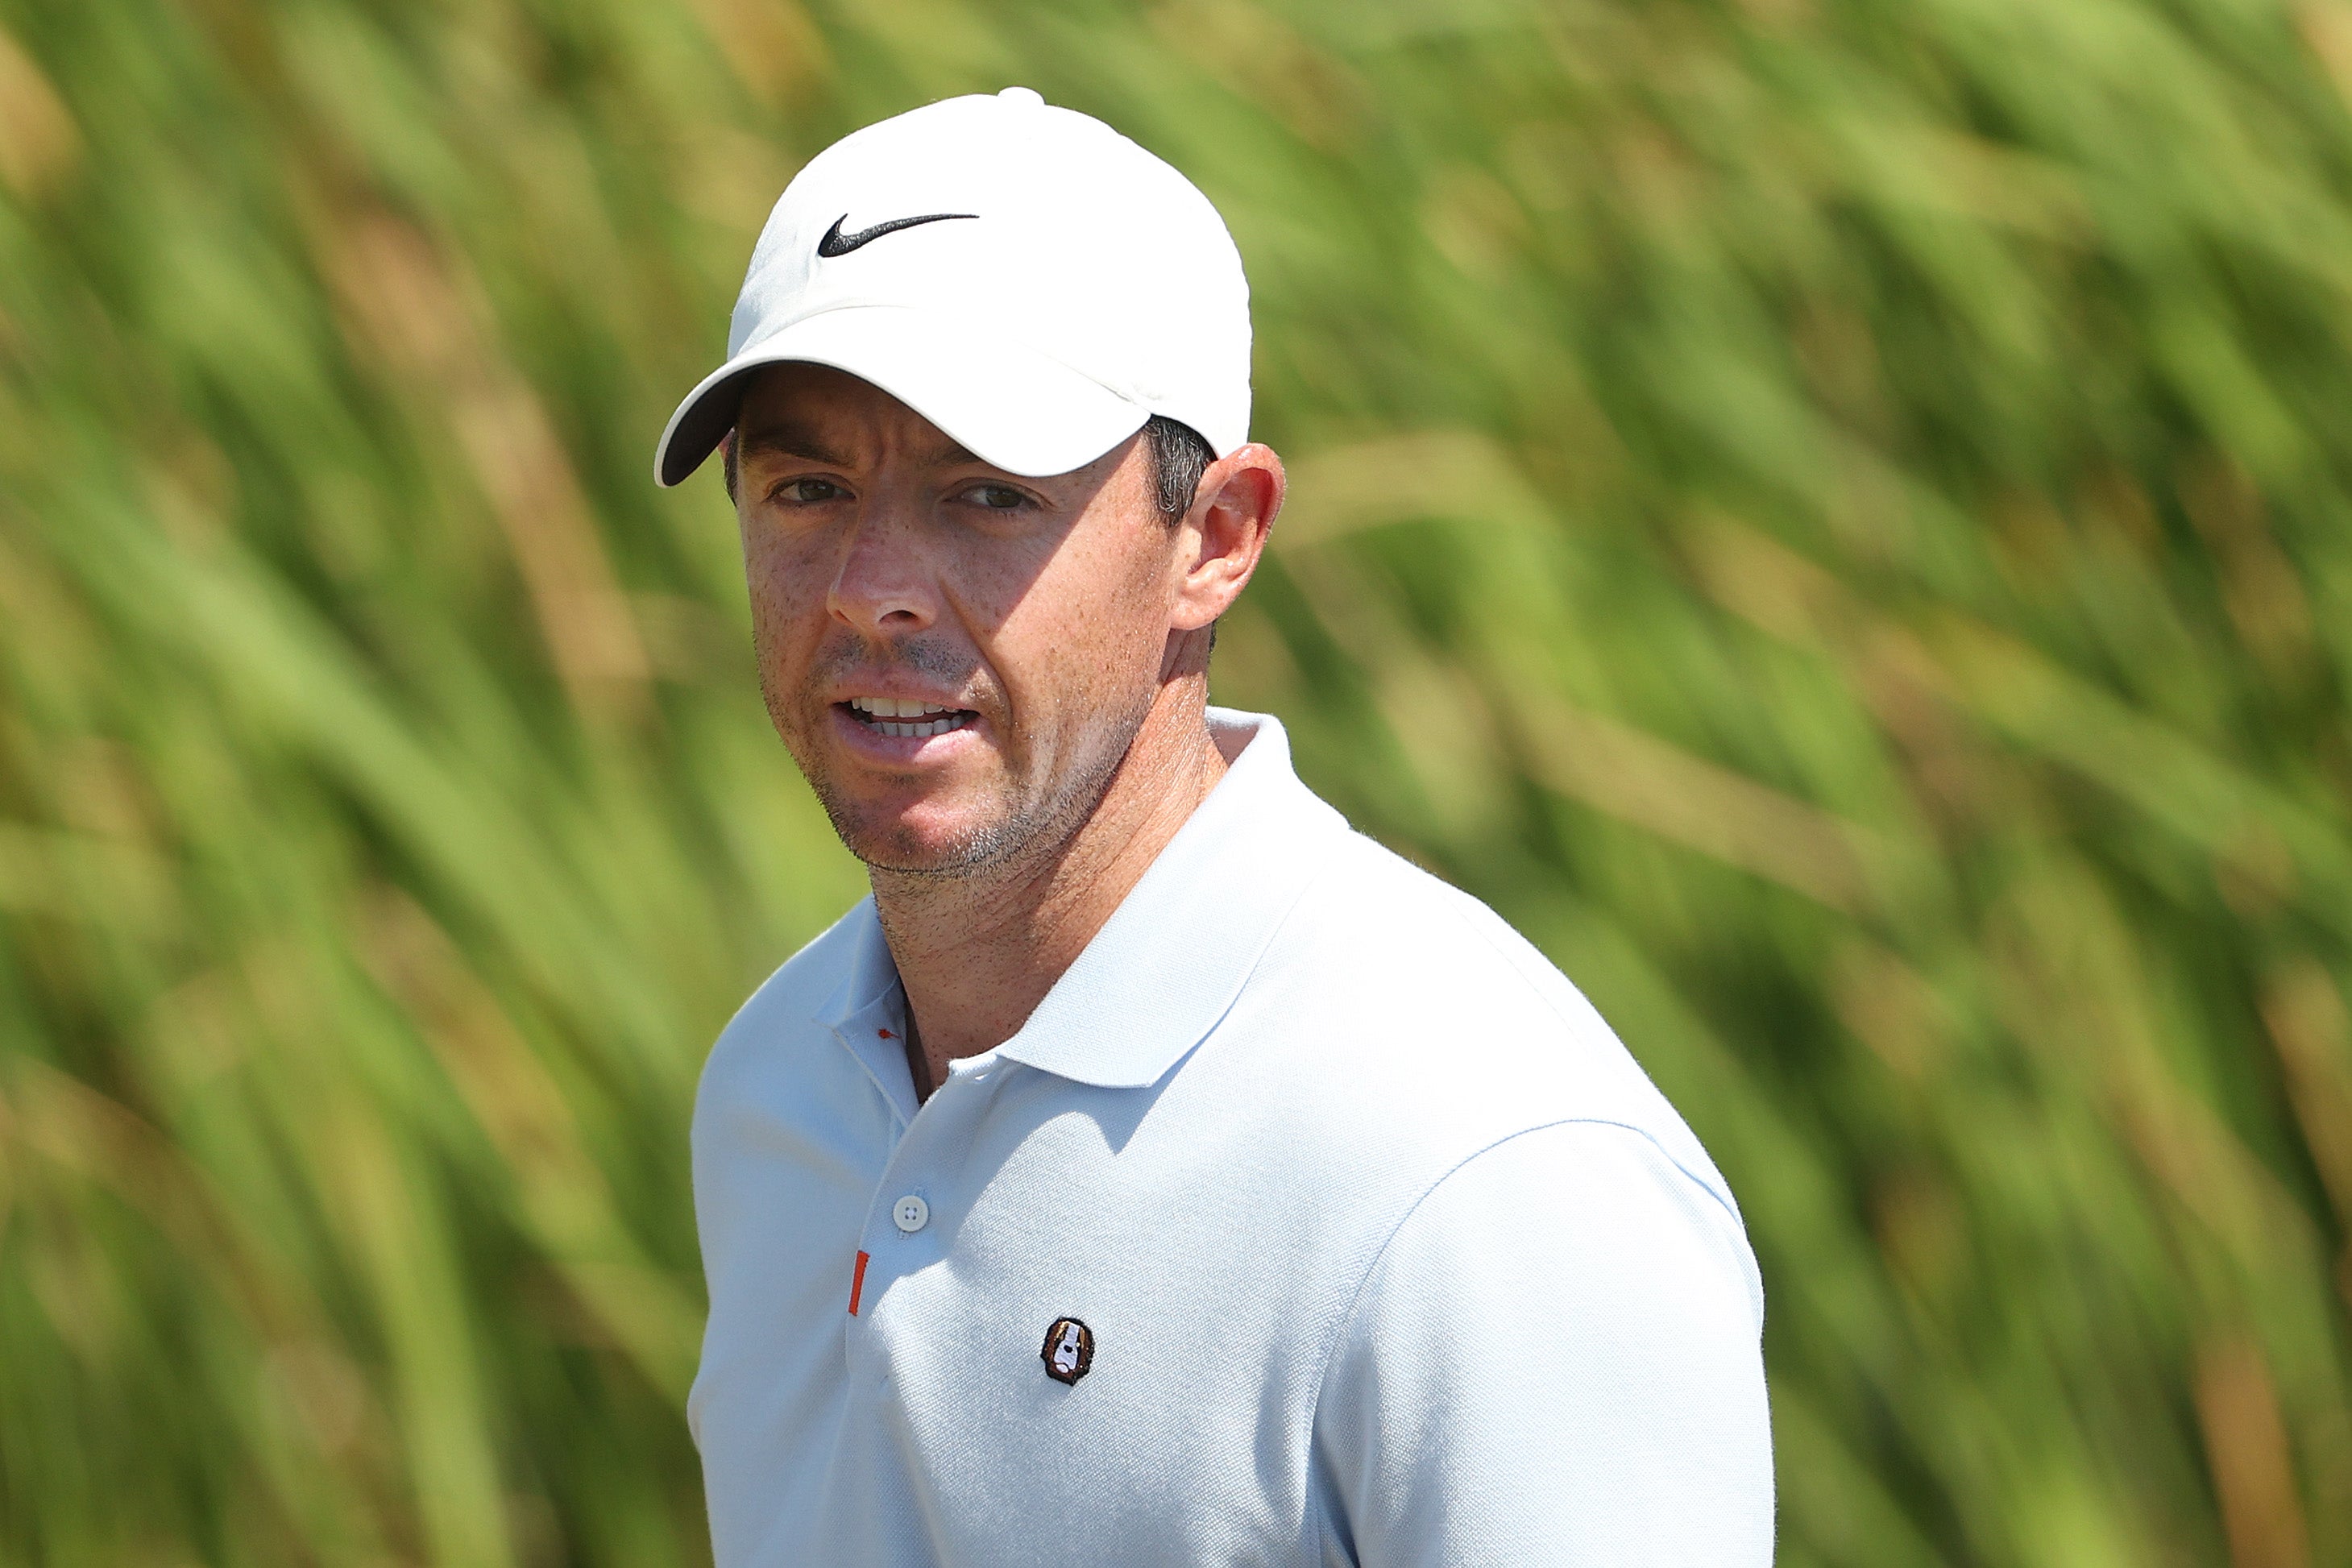 Rory McIlroy is in form having won the Wells Fargo Championship earlier this month